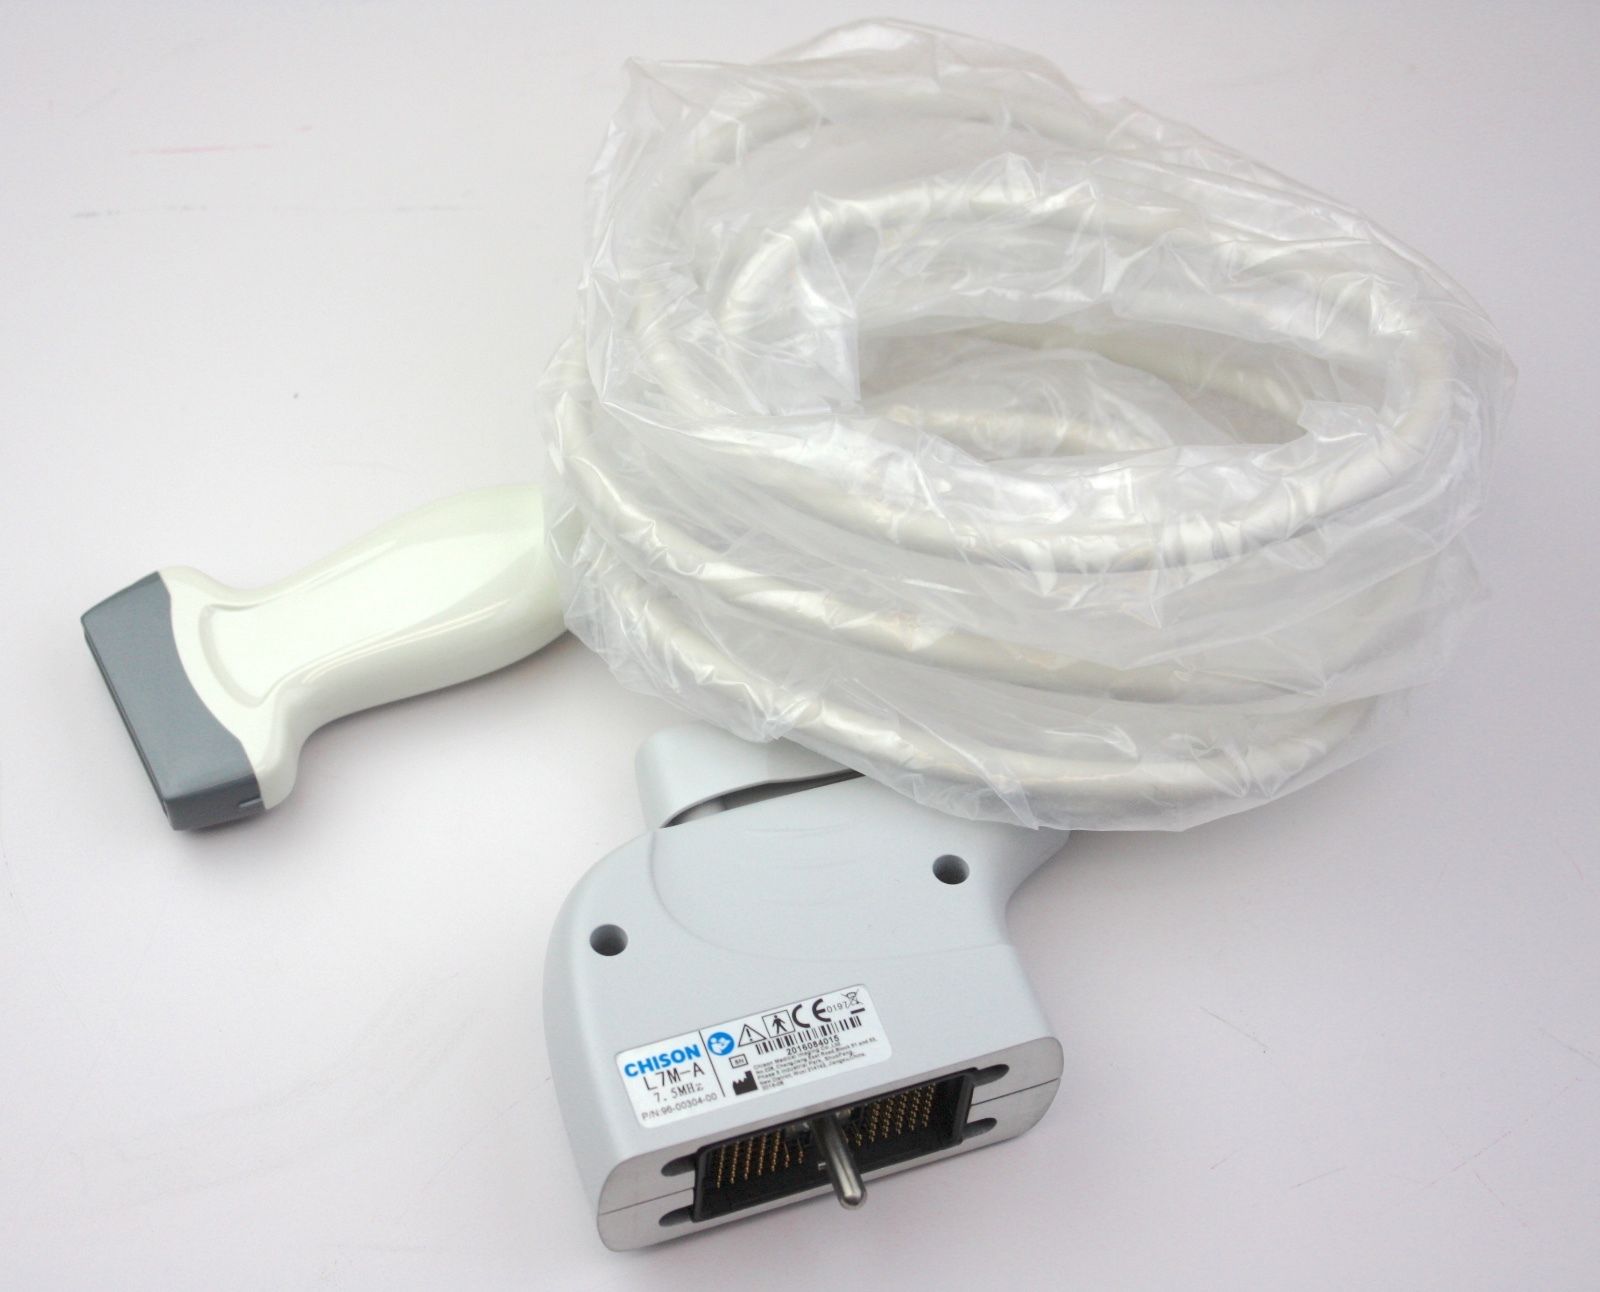 Linear Array Probe Transducer L7M-A, 5.3-10MHz, 40mm, Genuine Chison ECO Series DIAGNOSTIC ULTRASOUND MACHINES FOR SALE